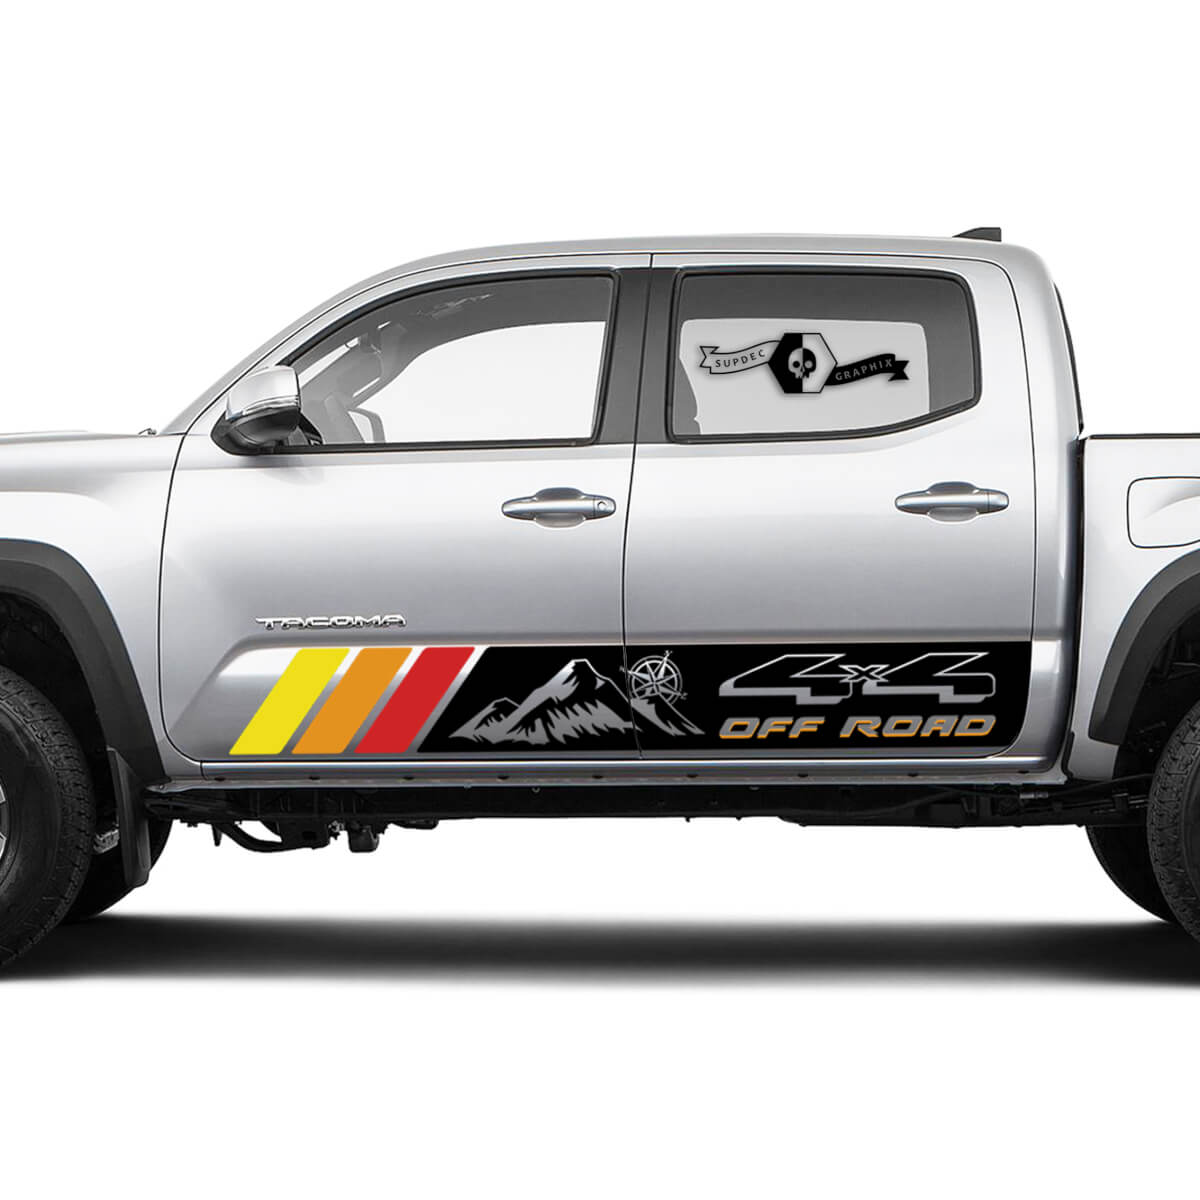 2 side TRD Mountain Off Road 4x4 Rocker Panel Vinyl Stickers Compass Wind Rose TOYOTA Colors Decals Stickers for Tacoma Tundra 4Runner Hilux